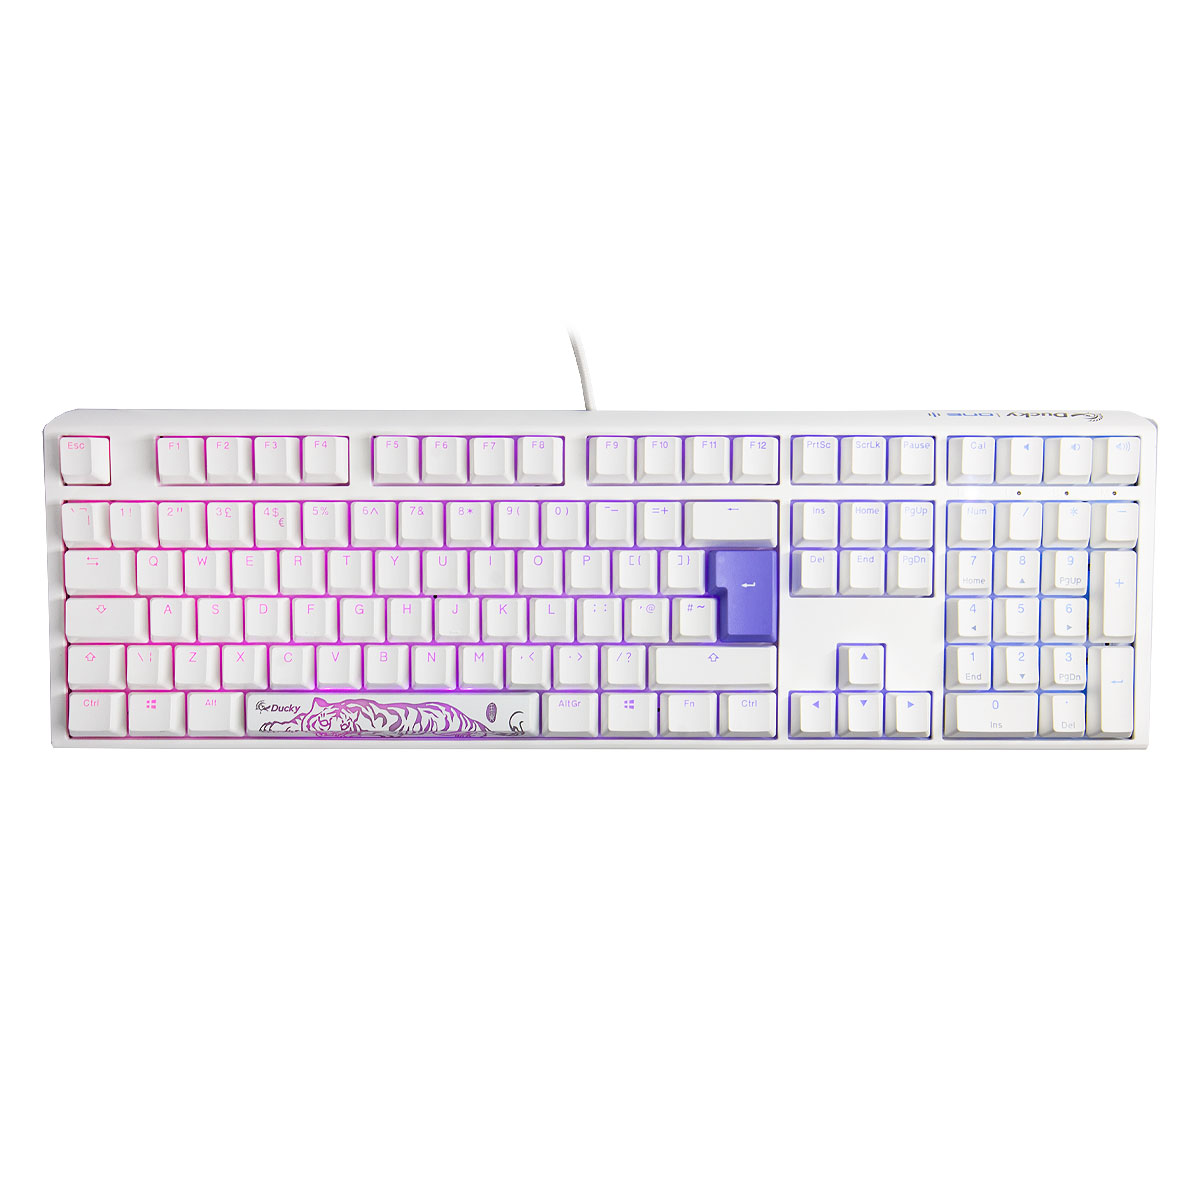 Ducky - Ducky One 3 Classic Fullsize USB RGB Mechanical Gaming Keyboard Cherry Brown - Pure White UK Layout